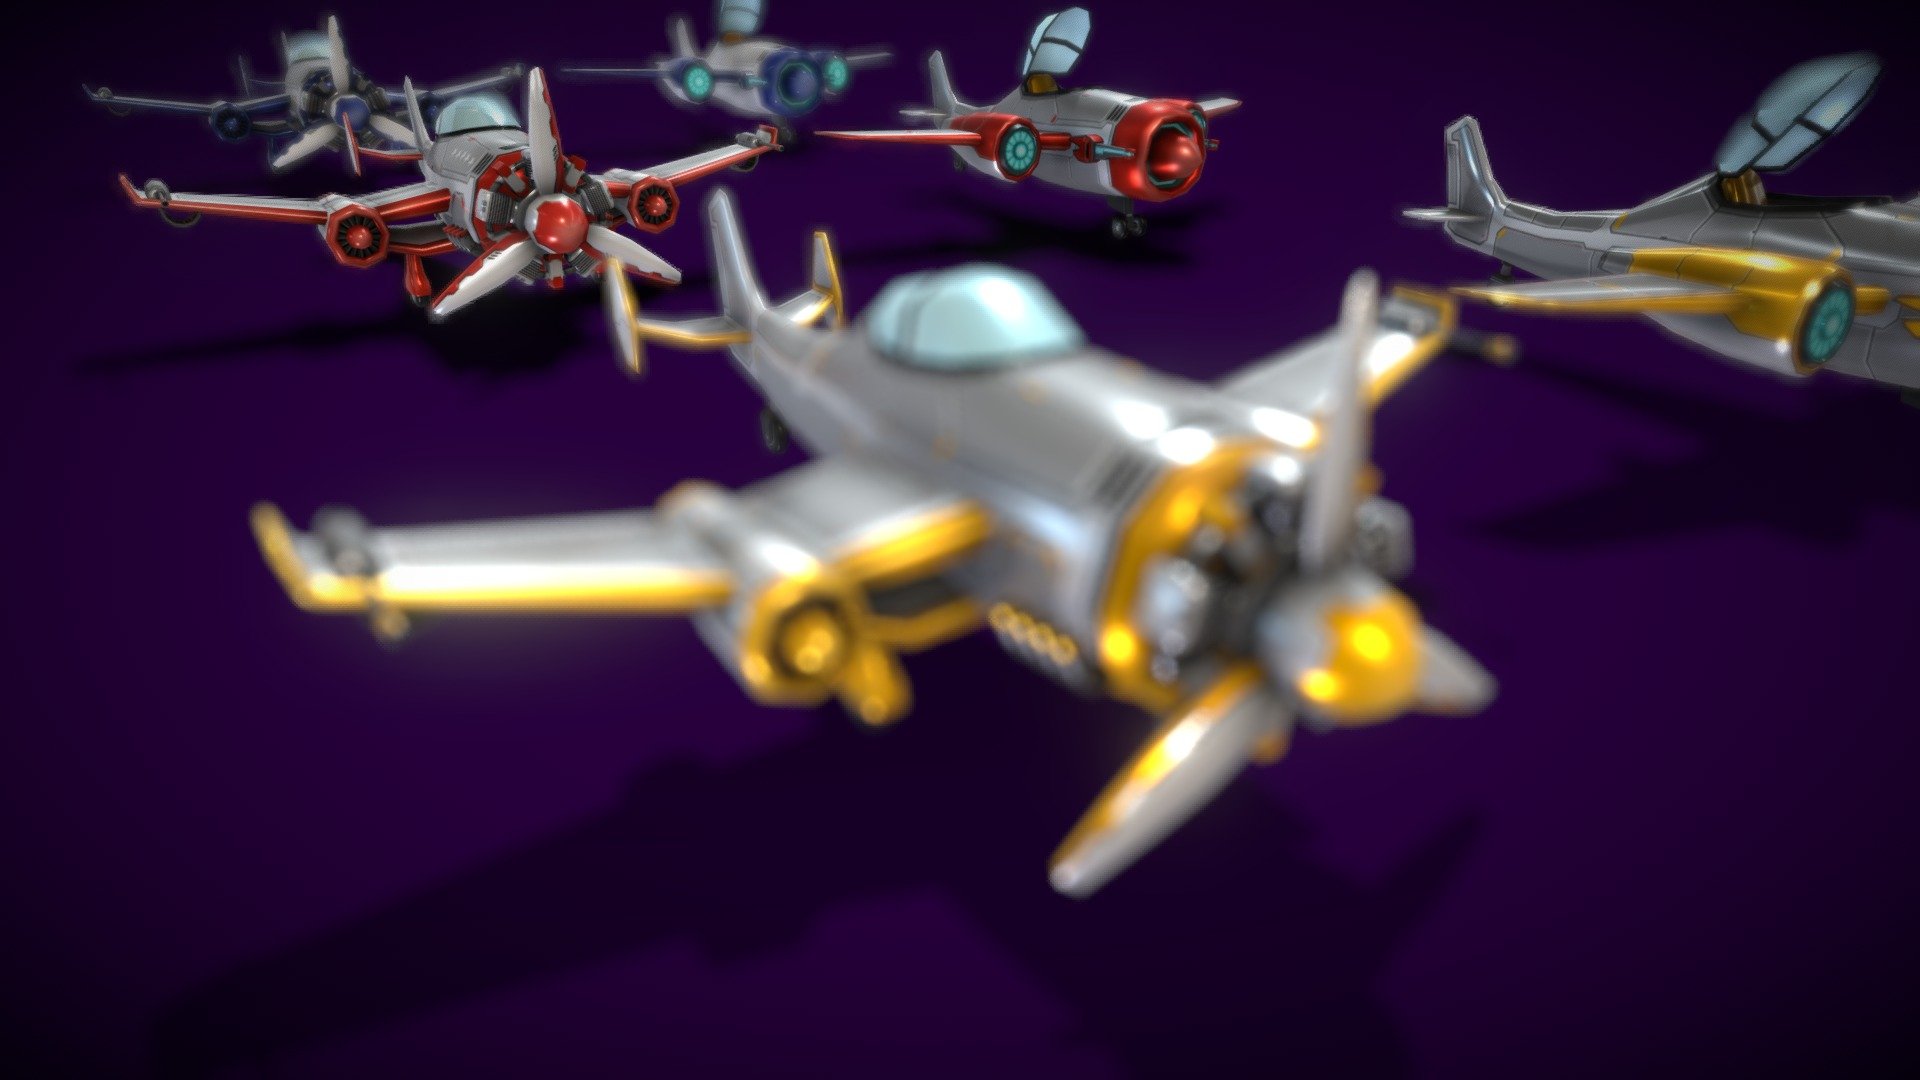 2 object 3D Air Plane and 3 texture 4096 
- Air plane 1:2263 polys /4411 Tris
- Air Plane 2 : 1367 polys/ 2617 Tris
- Texture size (4096/4096 ) - VIASS Air Plane 2021 - Buy Royalty Free 3D model by VIASS 3d model